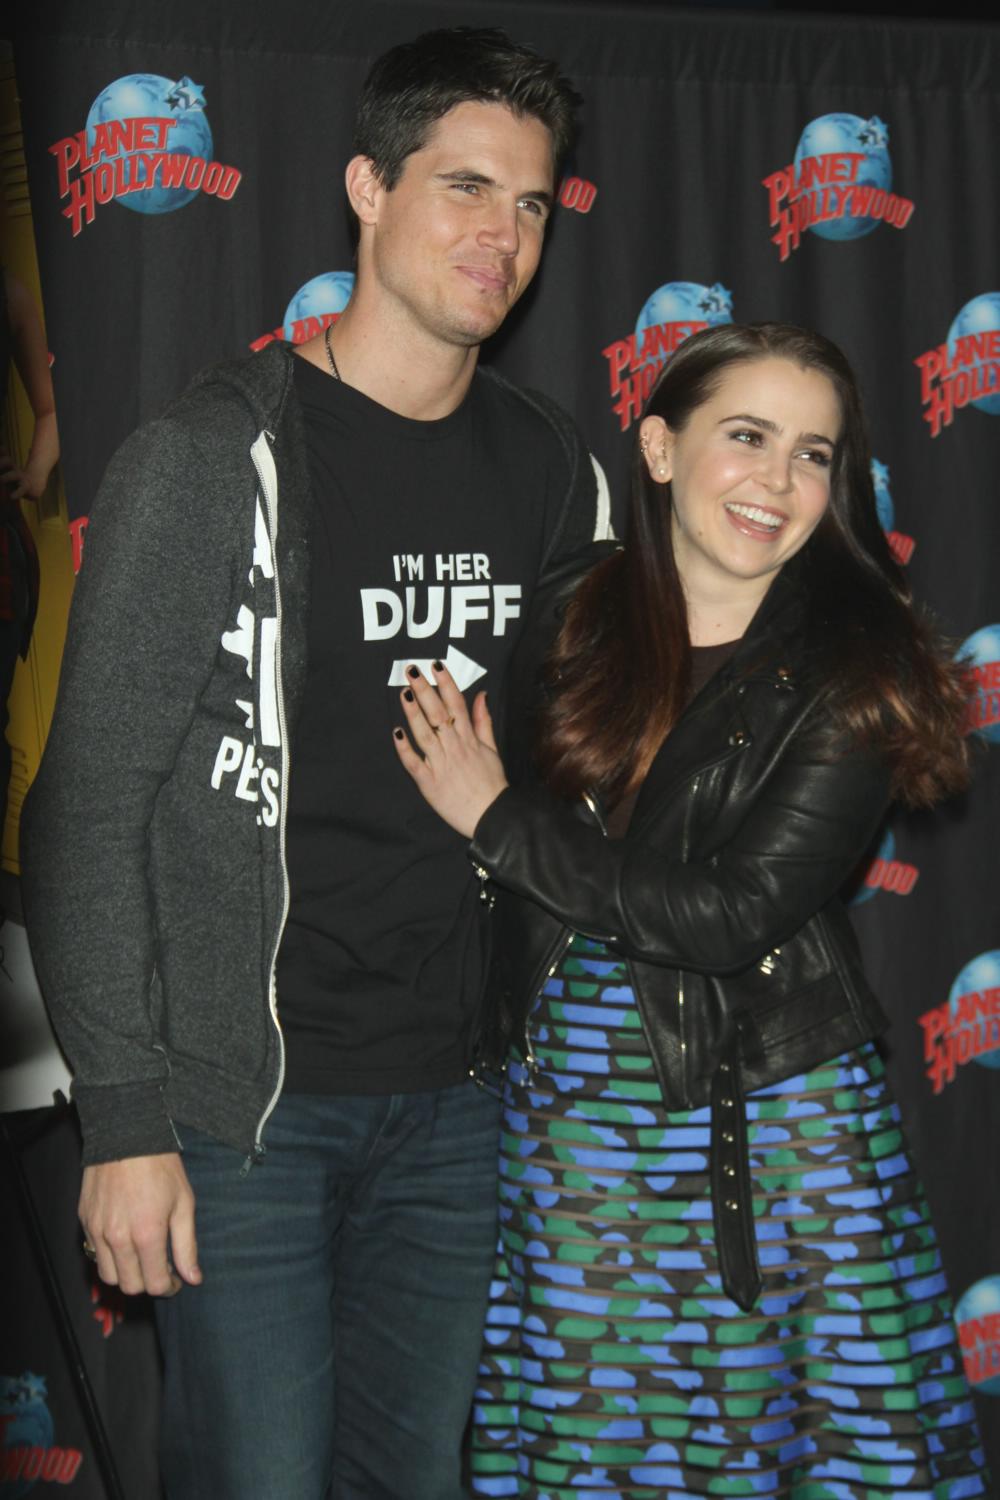 Mae Whitman and Robert Amell of The Duff Visit Planet Hollywood Times Square